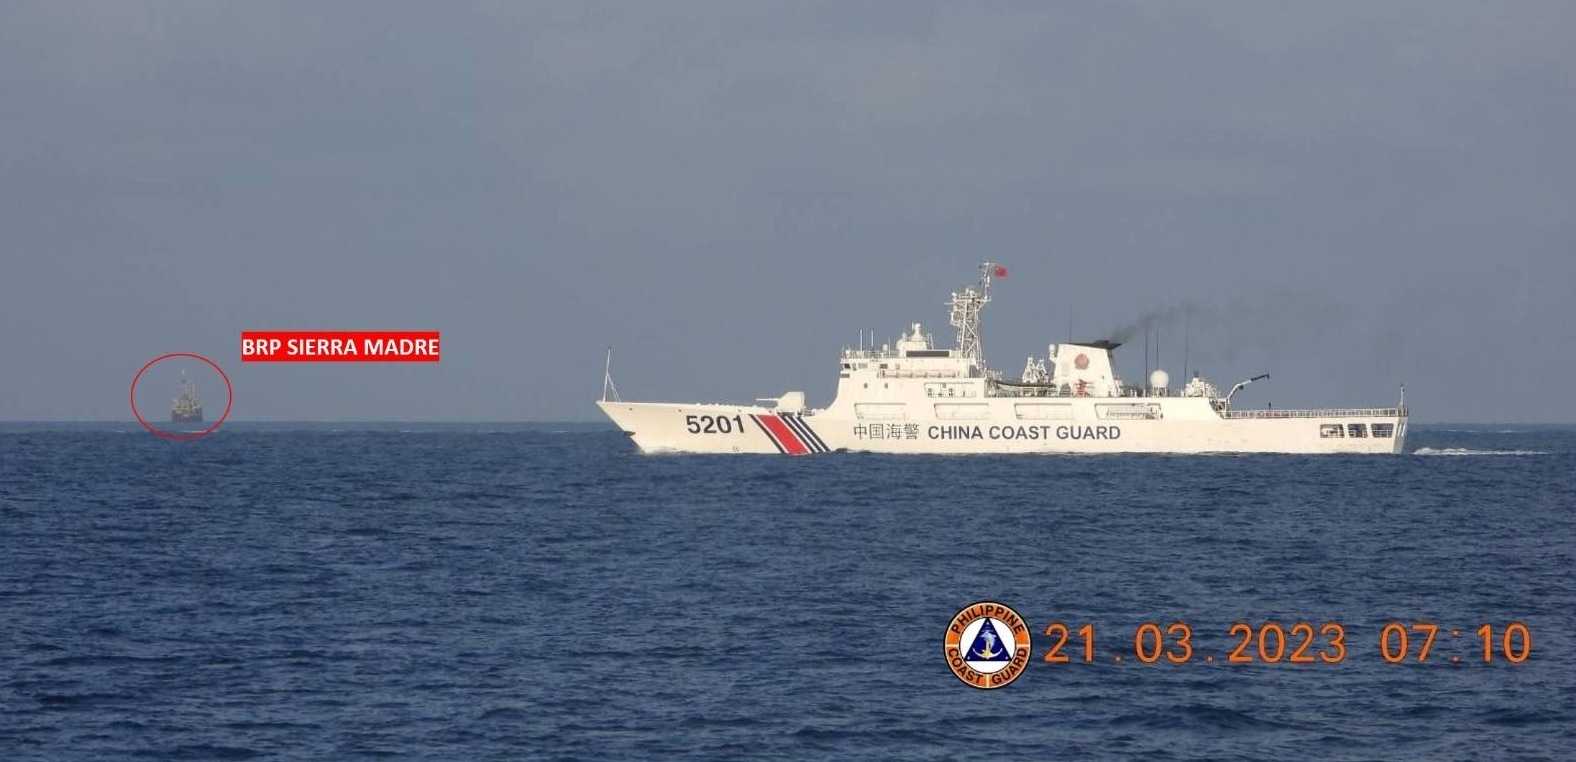 Chinese Embassy stands firm that PH vowed to remove BRP Sierra Madre